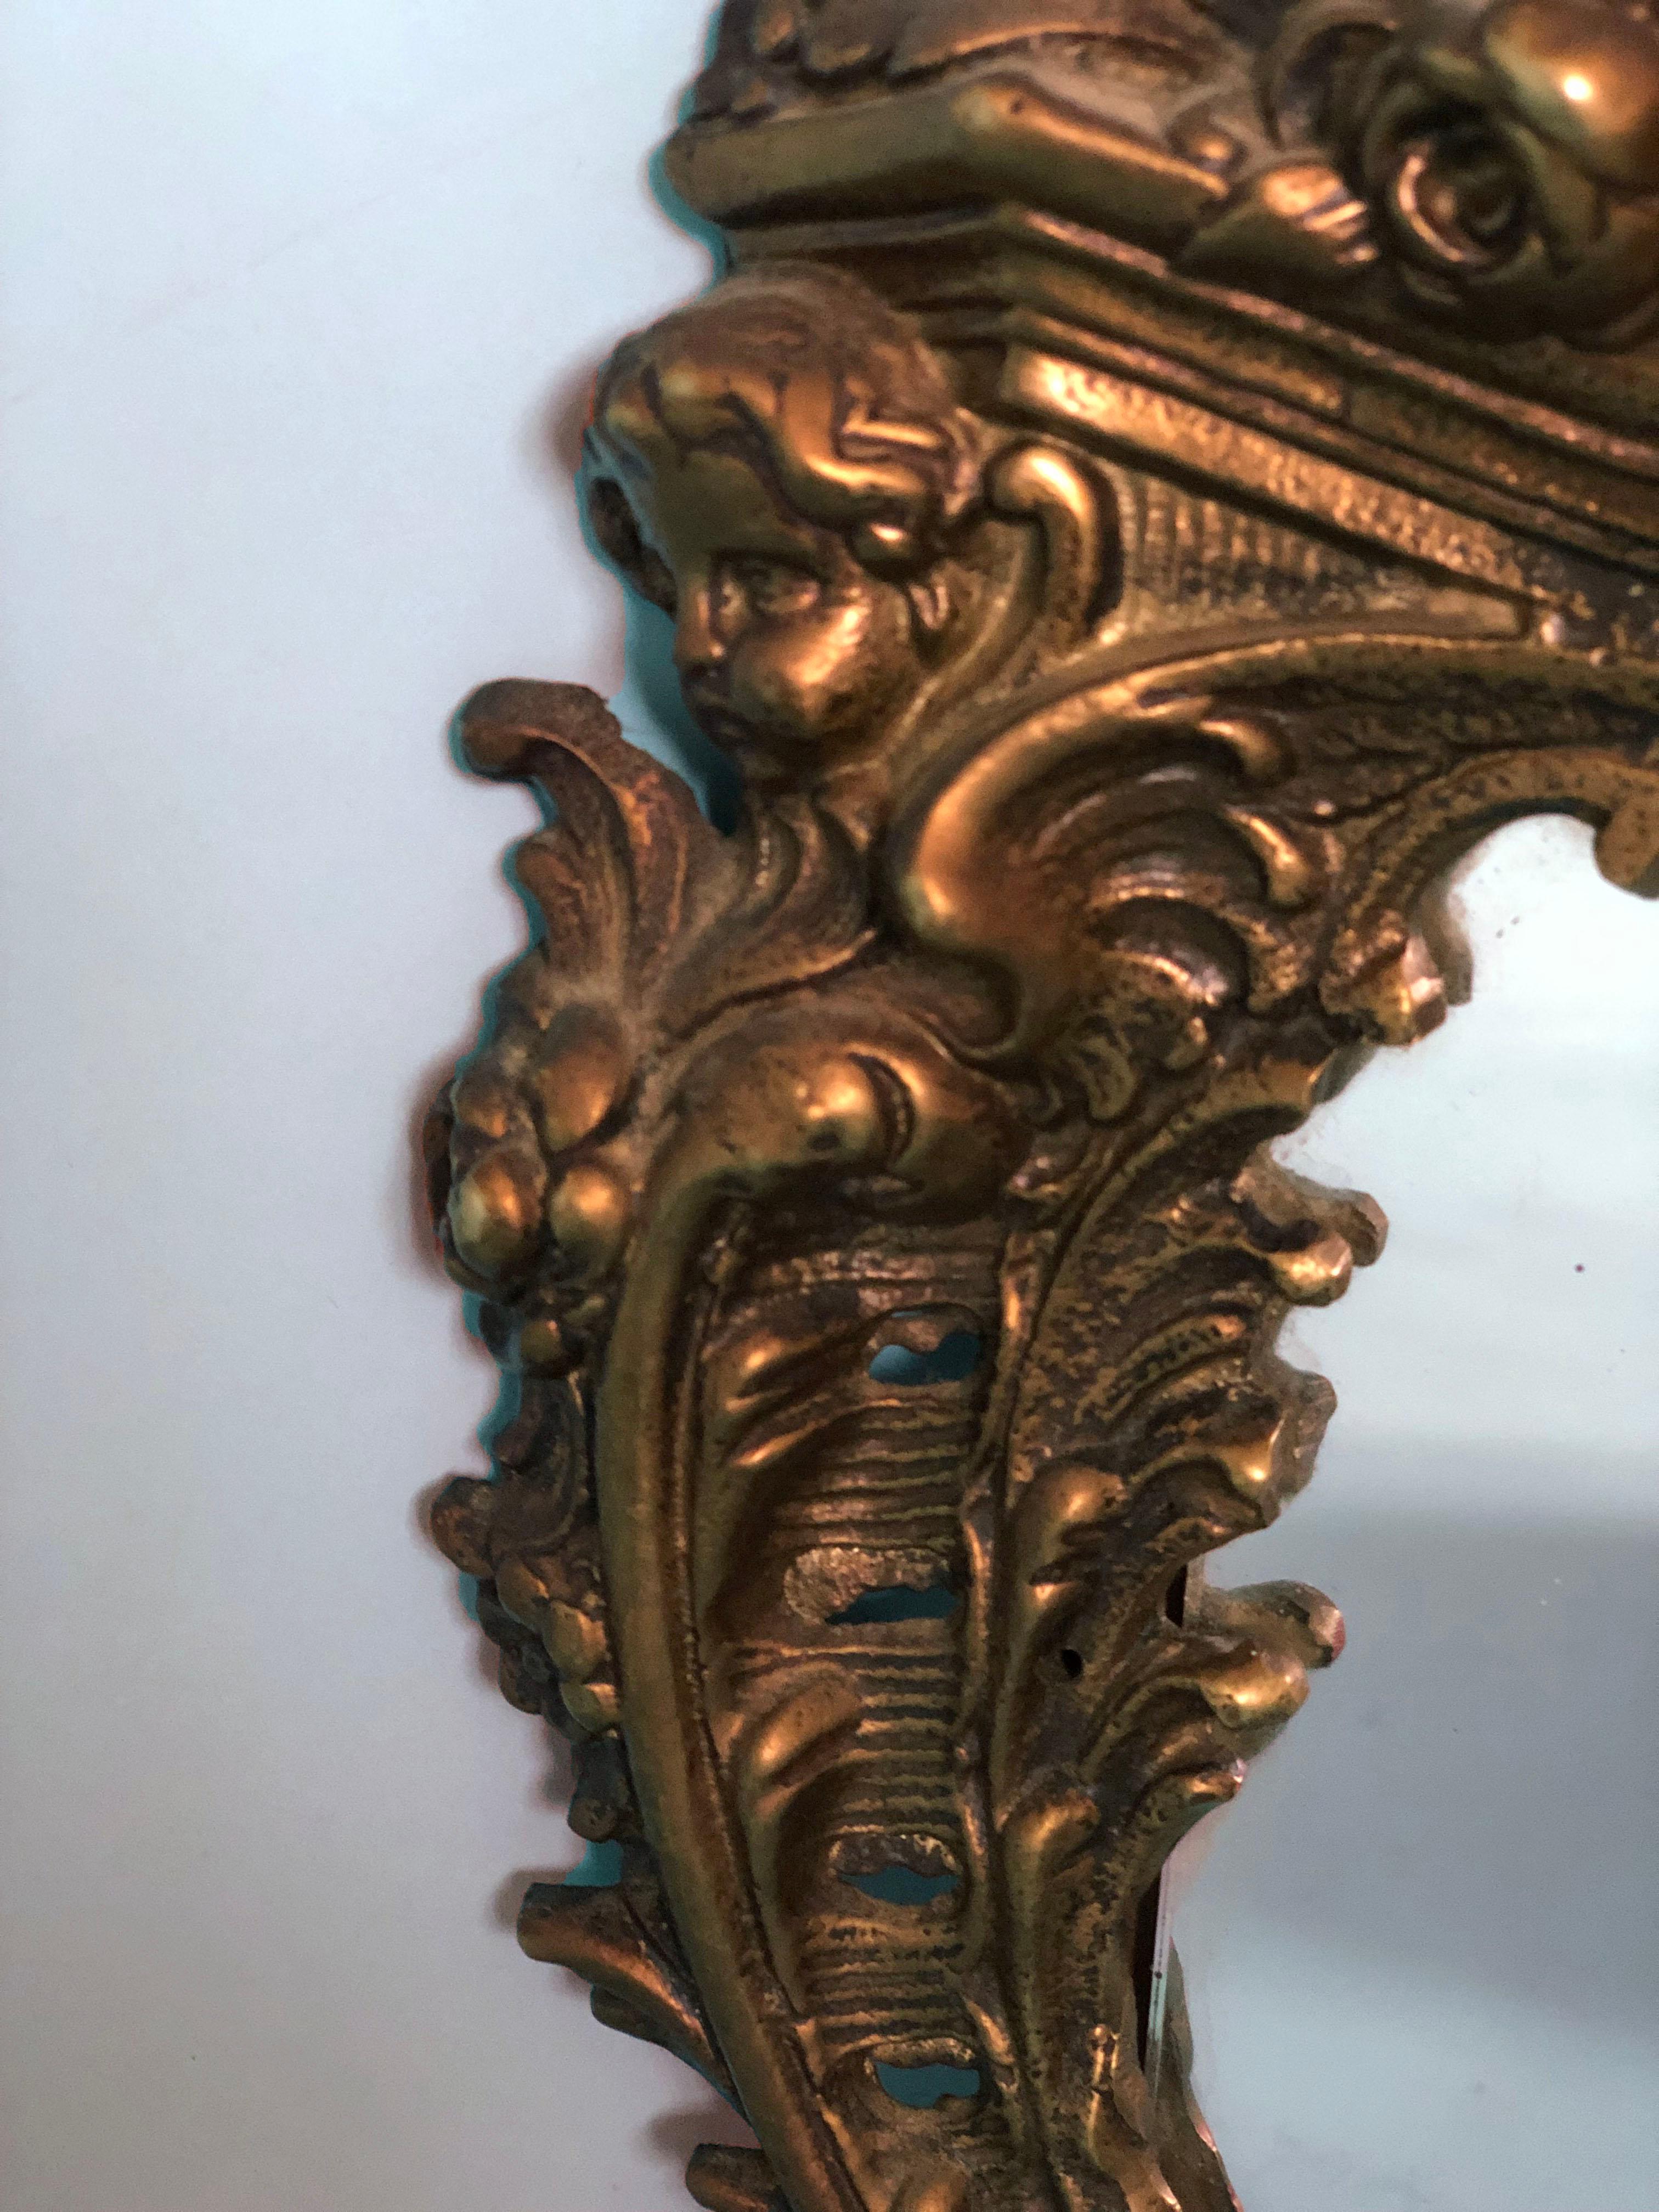 A richly detailed gold table mirror in the rococo style. This antique bronze mirror standing on 2 legs has a cherub head on the side.

Beautifully weathered mirror In good condition. France, Late 19th Century.

Object: Mirror
Designer: